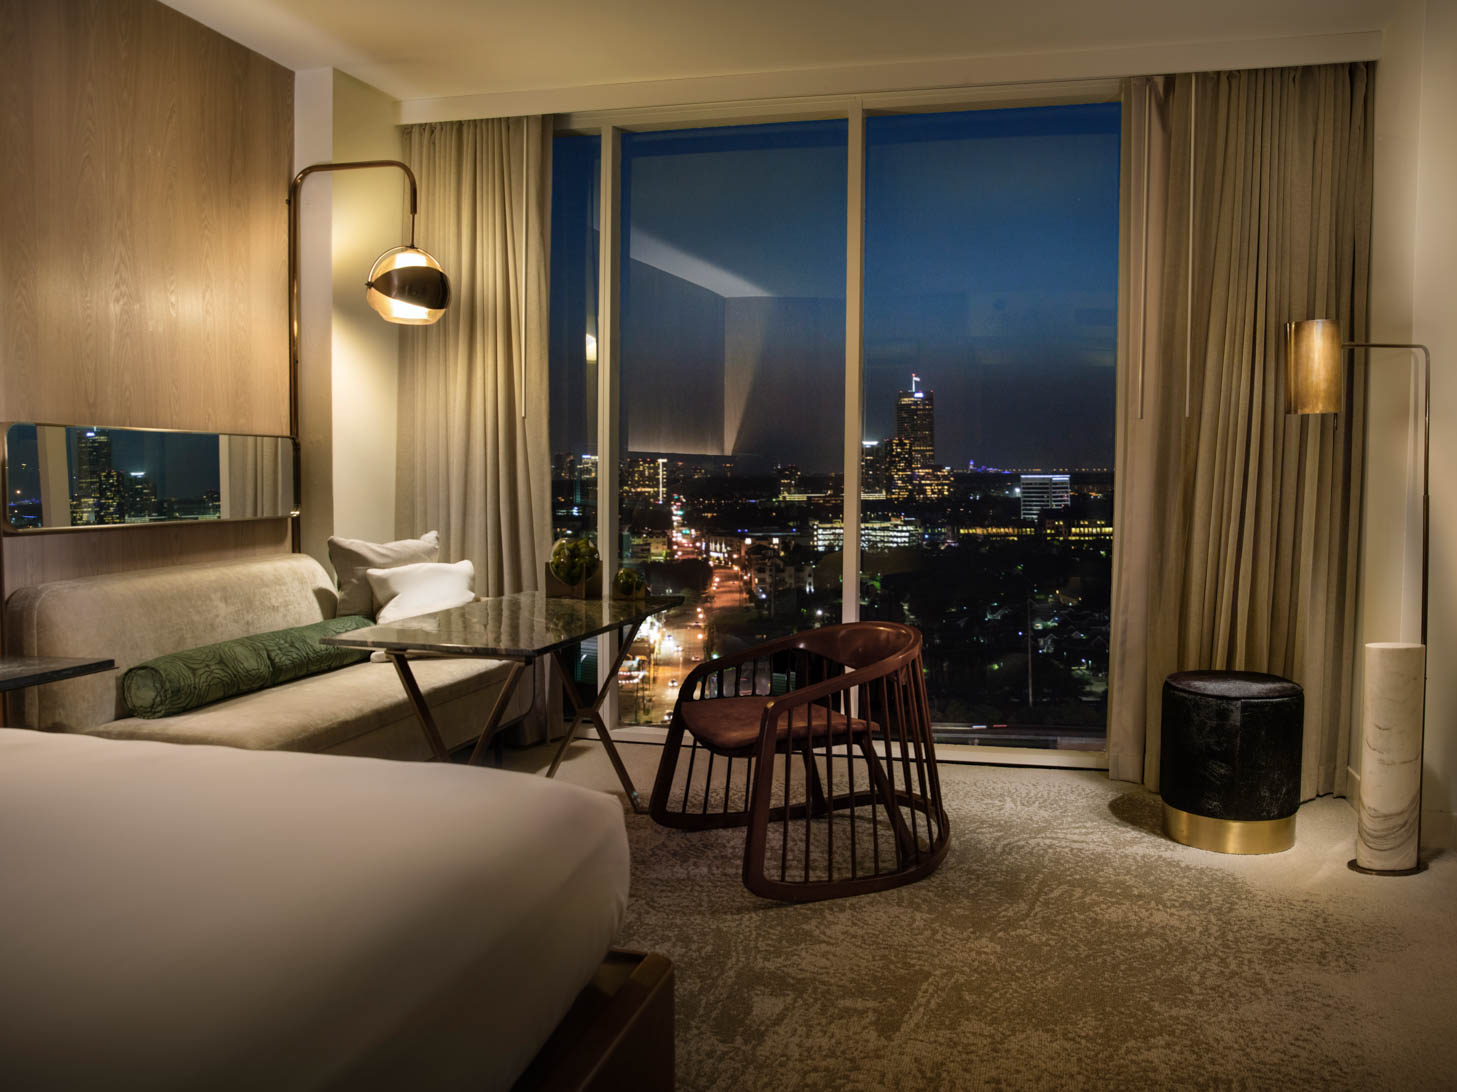 View from king bedroom with view of downtown Houston through floor to ceiling windows